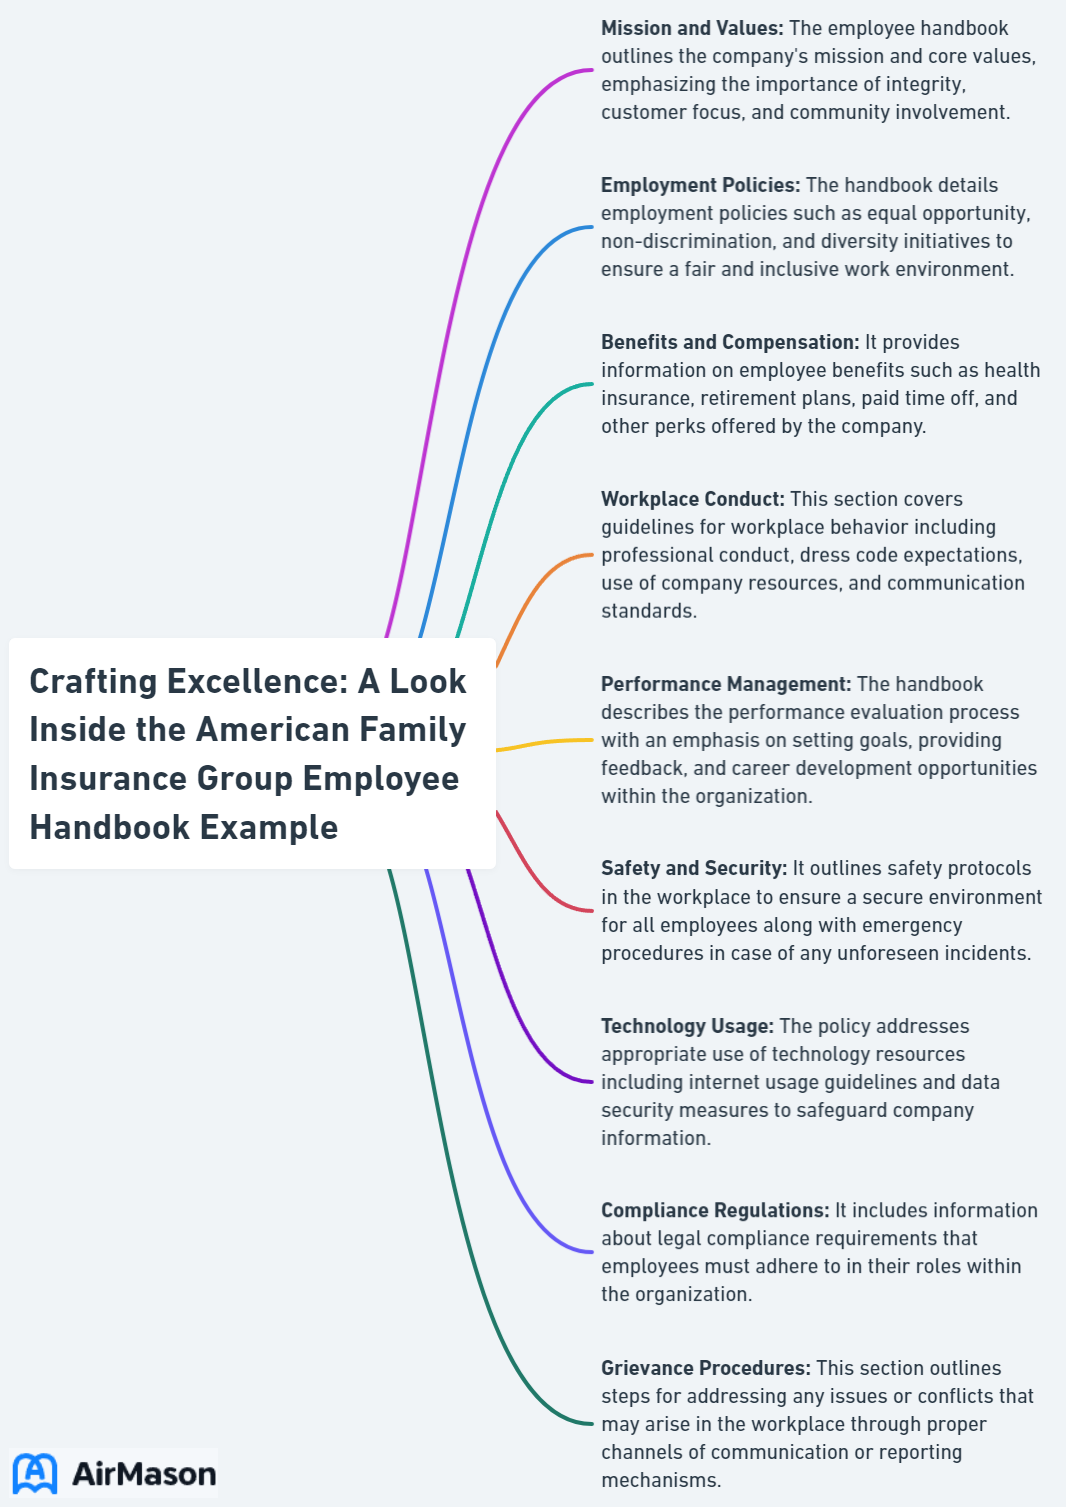 Crafting Excellence: A Look Inside the American Family Insurance Group Employee Handbook Example